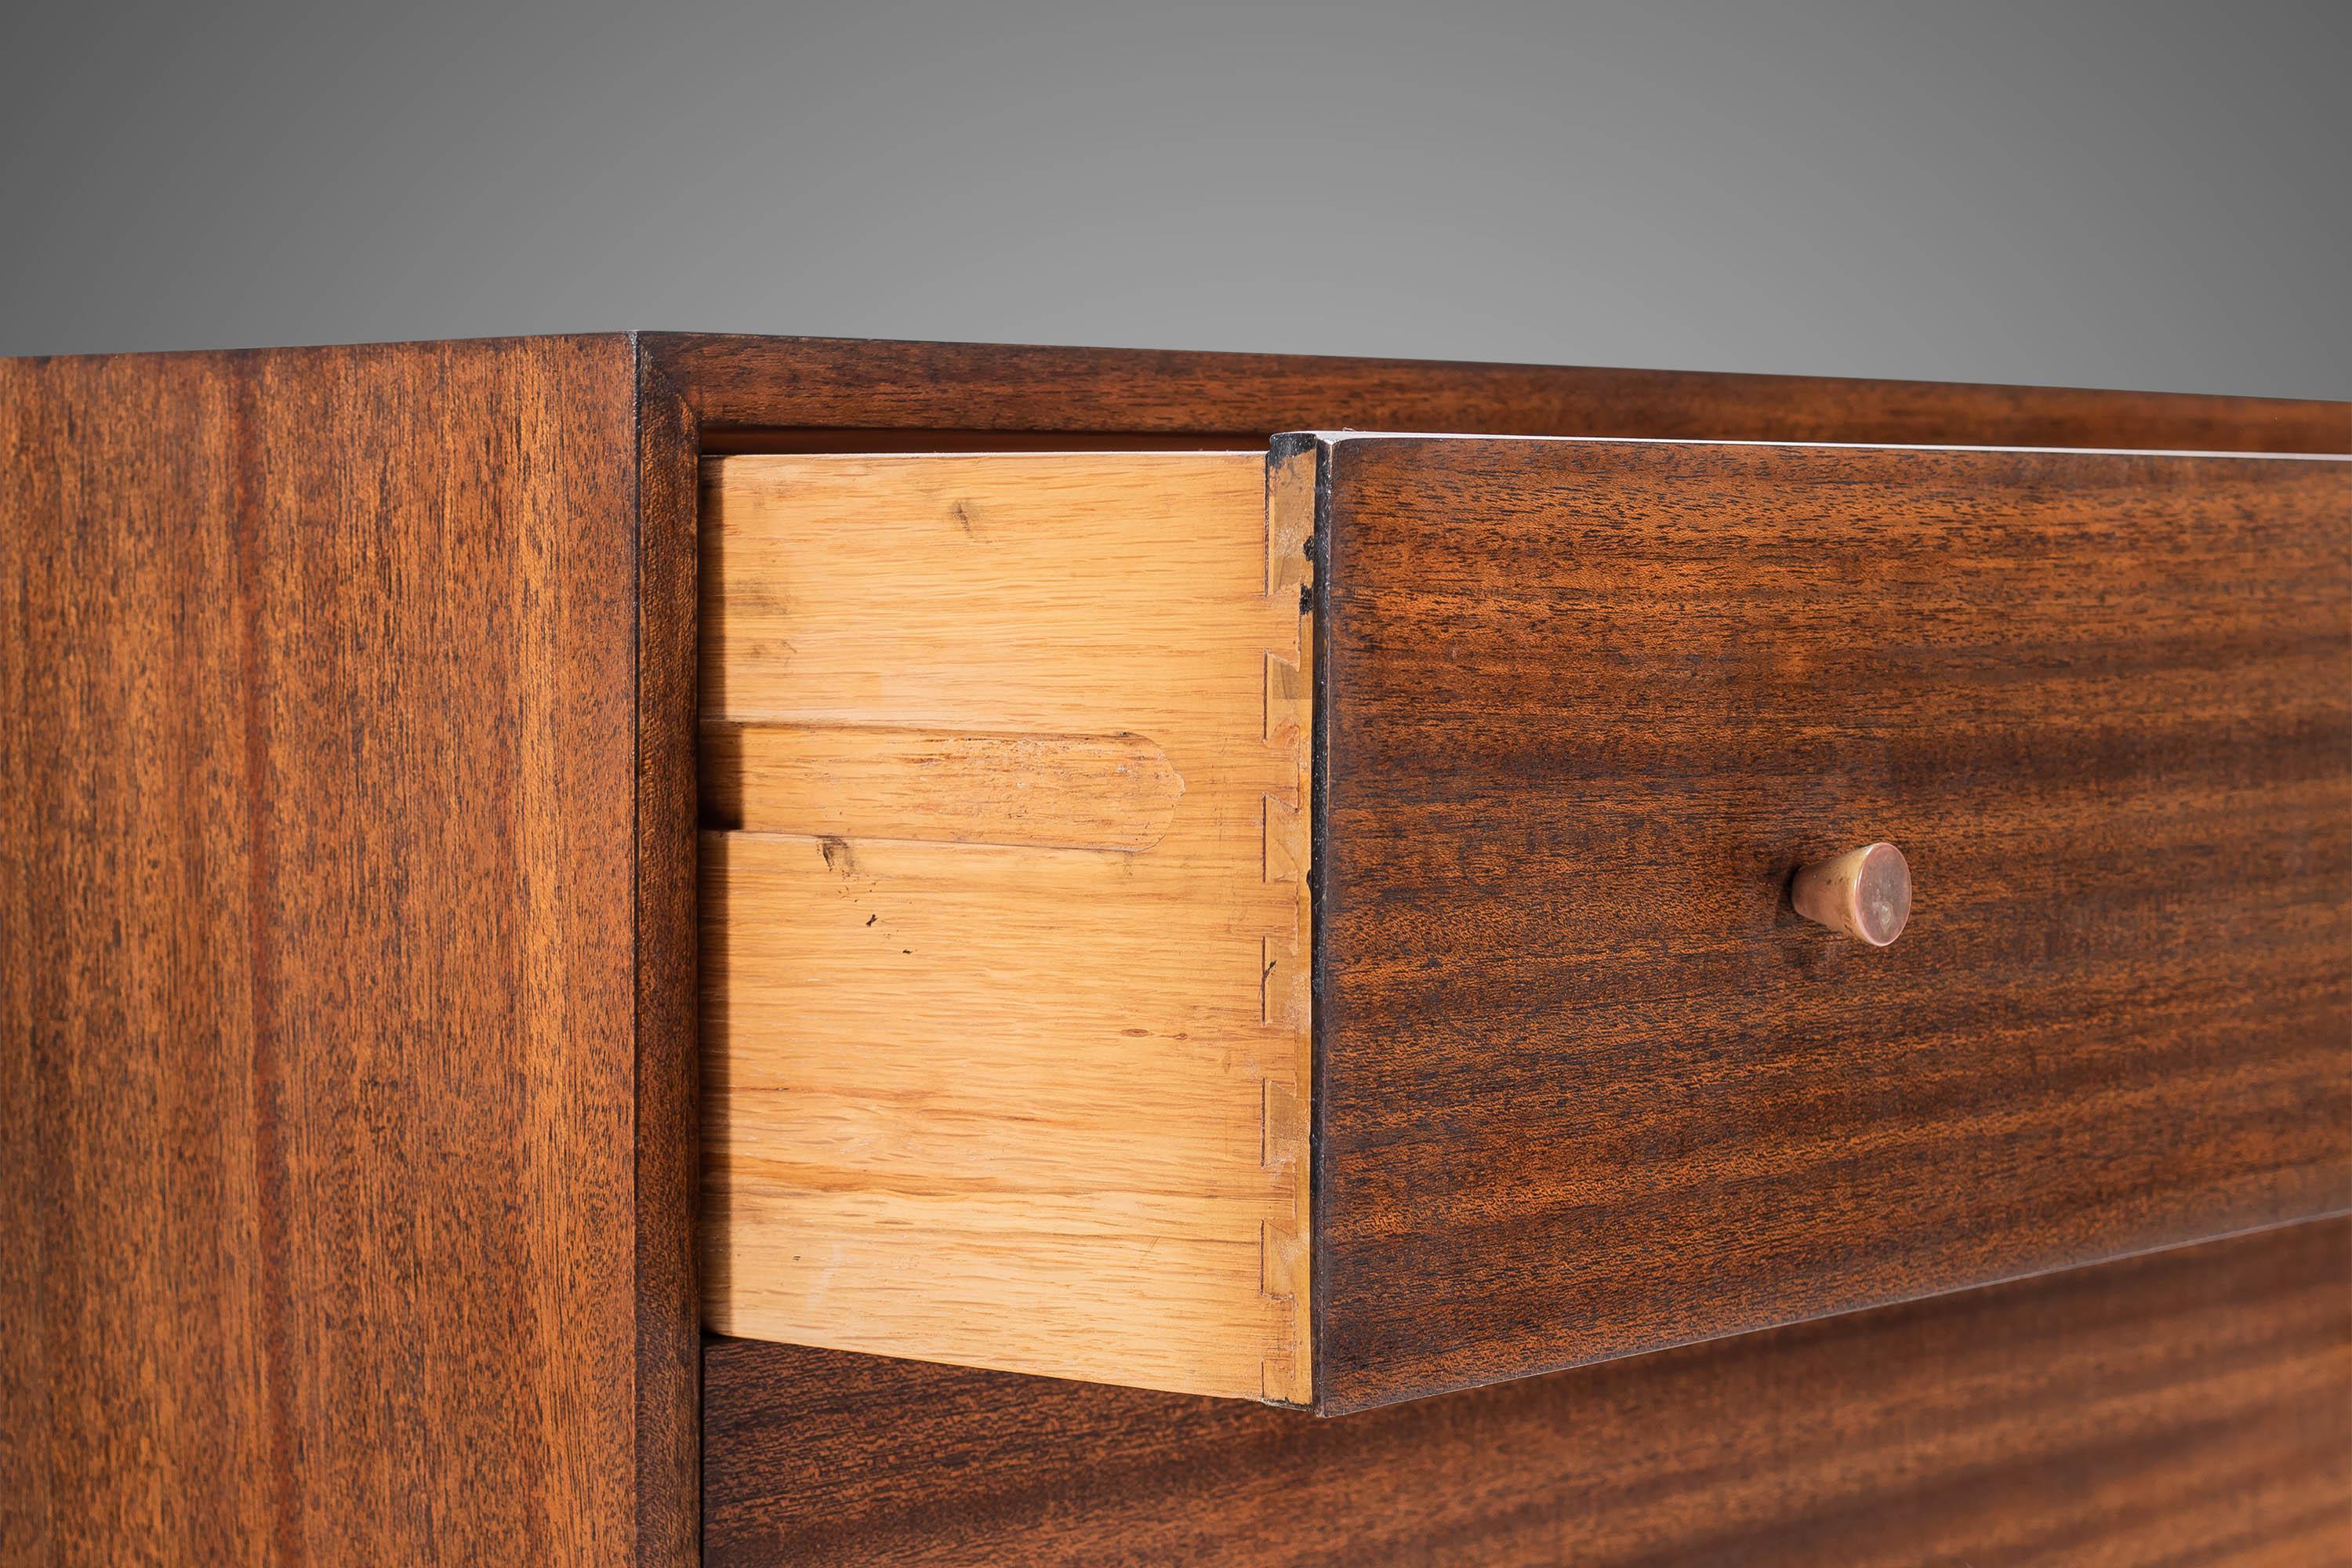 Rare Mid-Century Modern Three-Drawer Dresser in Mahogany by Harvey Probber, USA For Sale 2